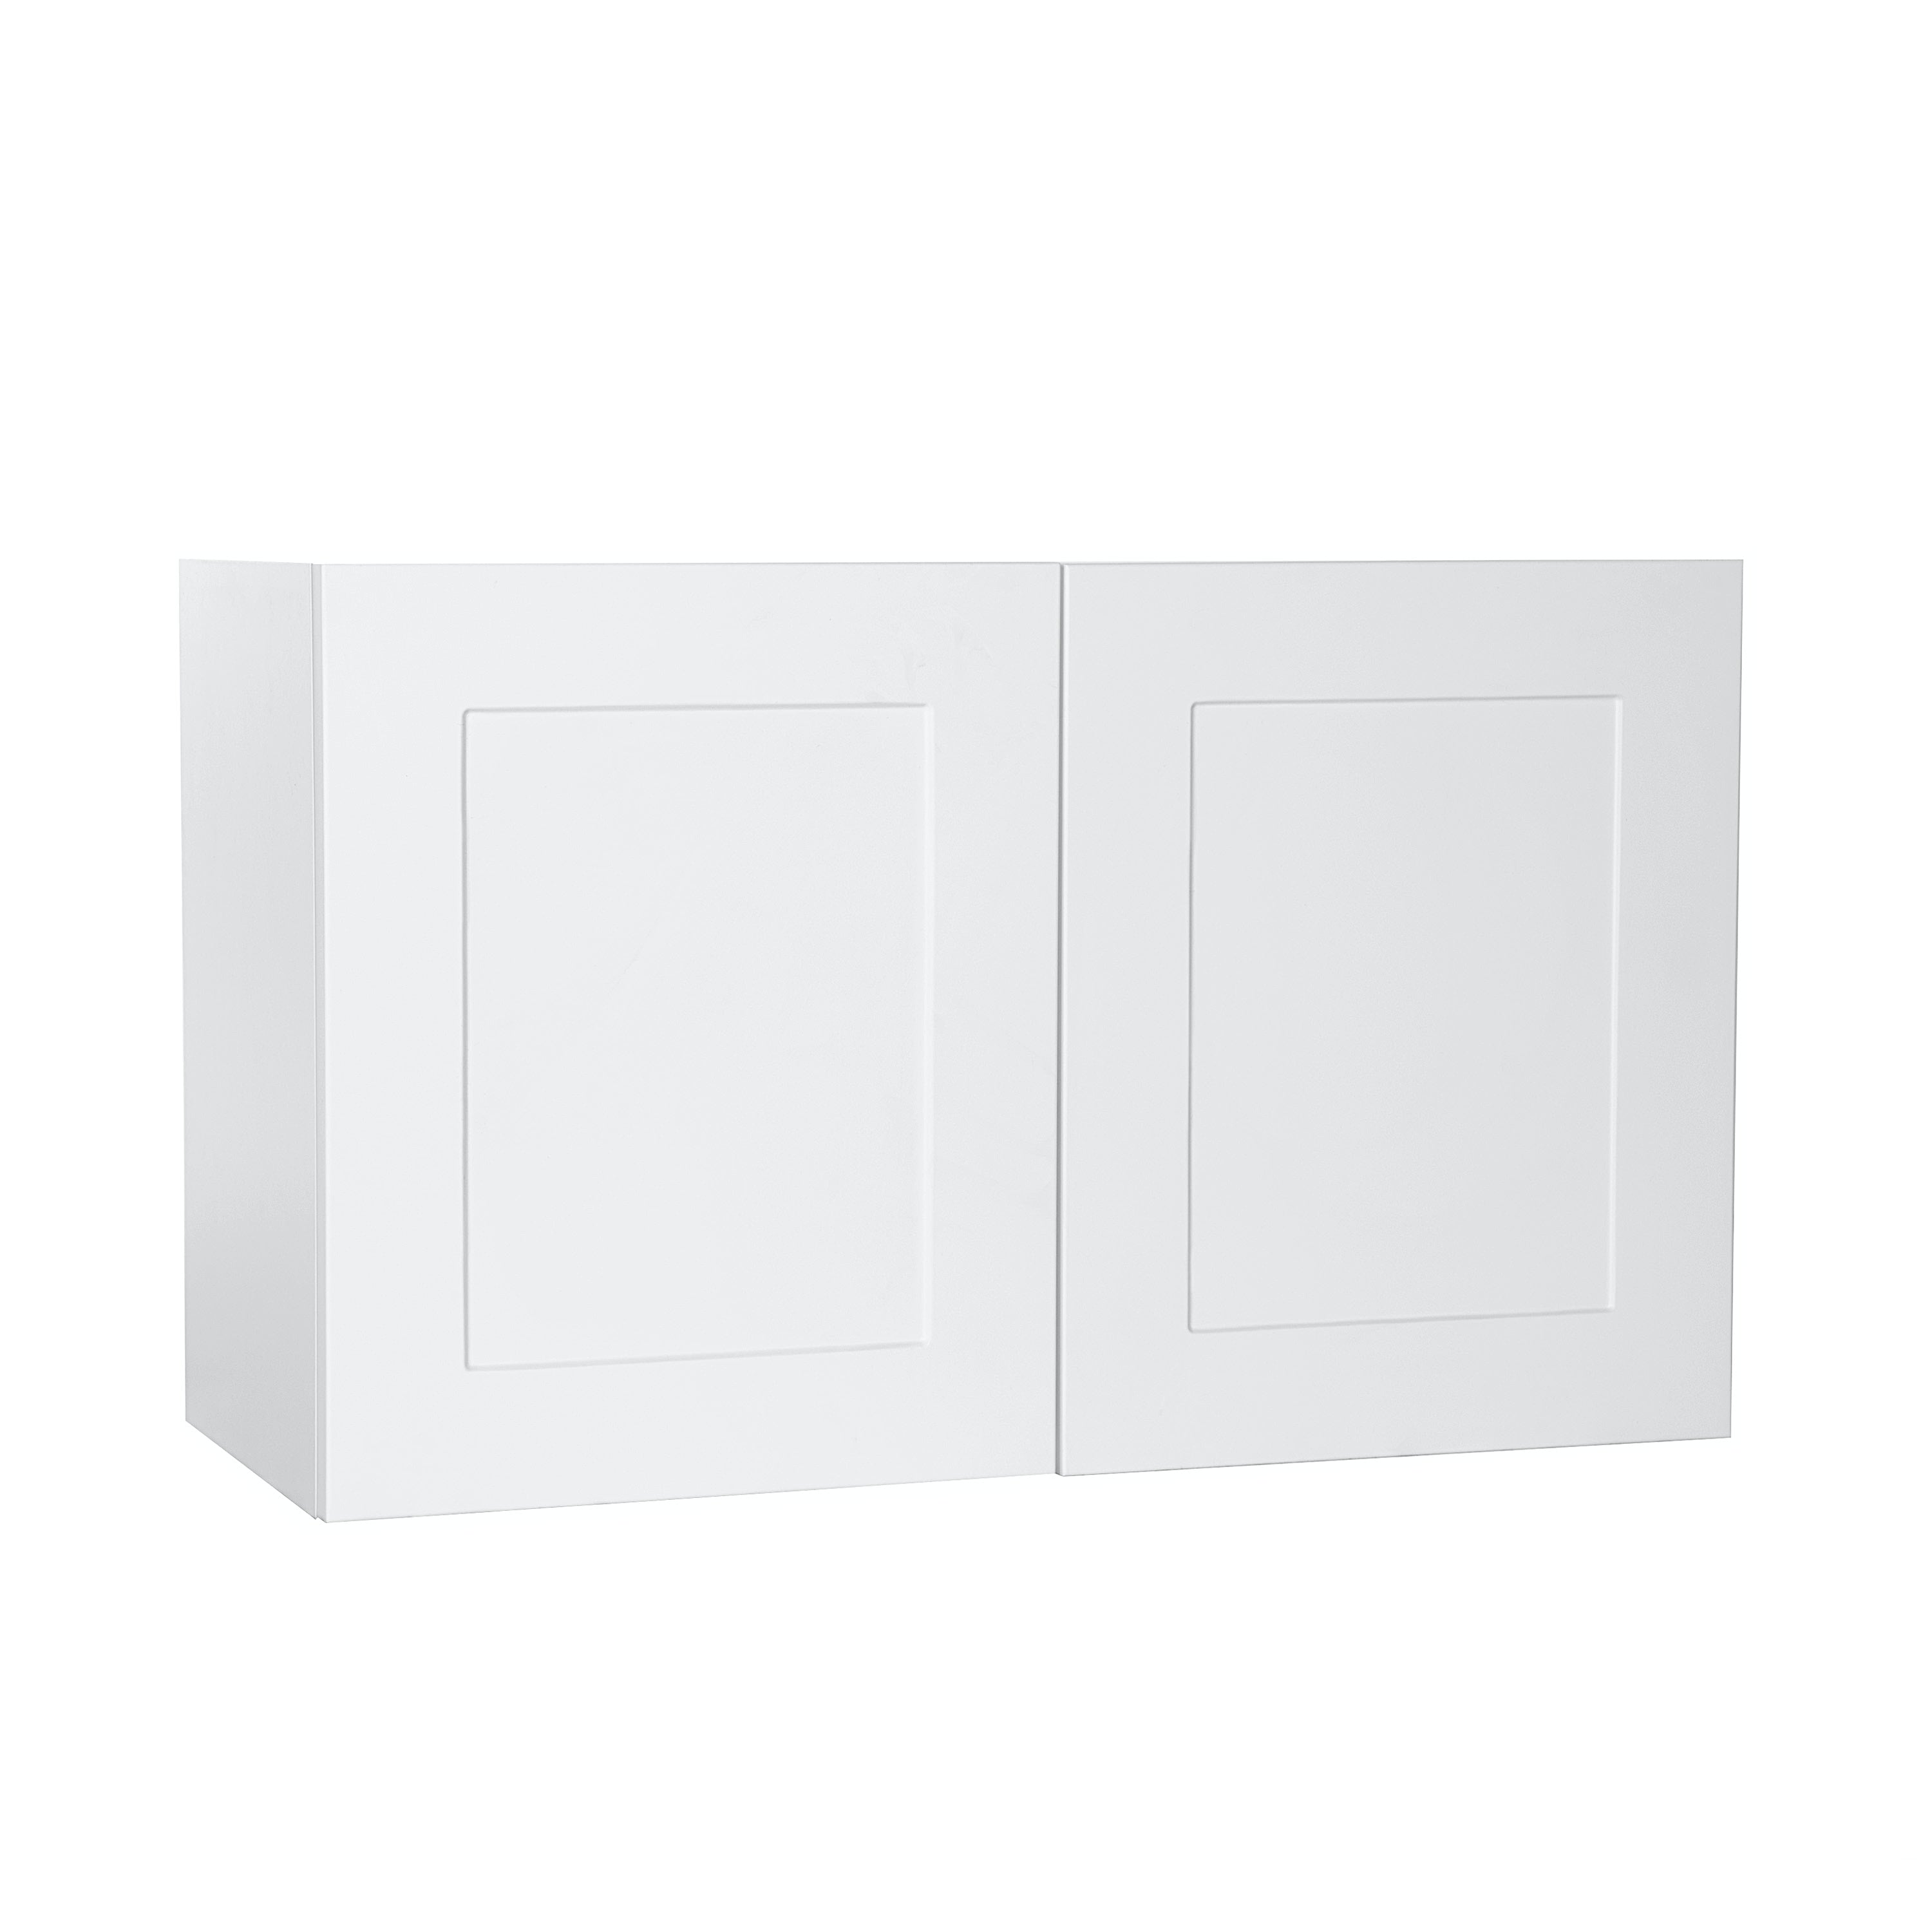 Quick Assemble Modern Style with Soft Close, White Shaker Wall Bridge Kitchen Cabinet (30 in W x 18 in H x 12 in D) -  Pro-Edge HD